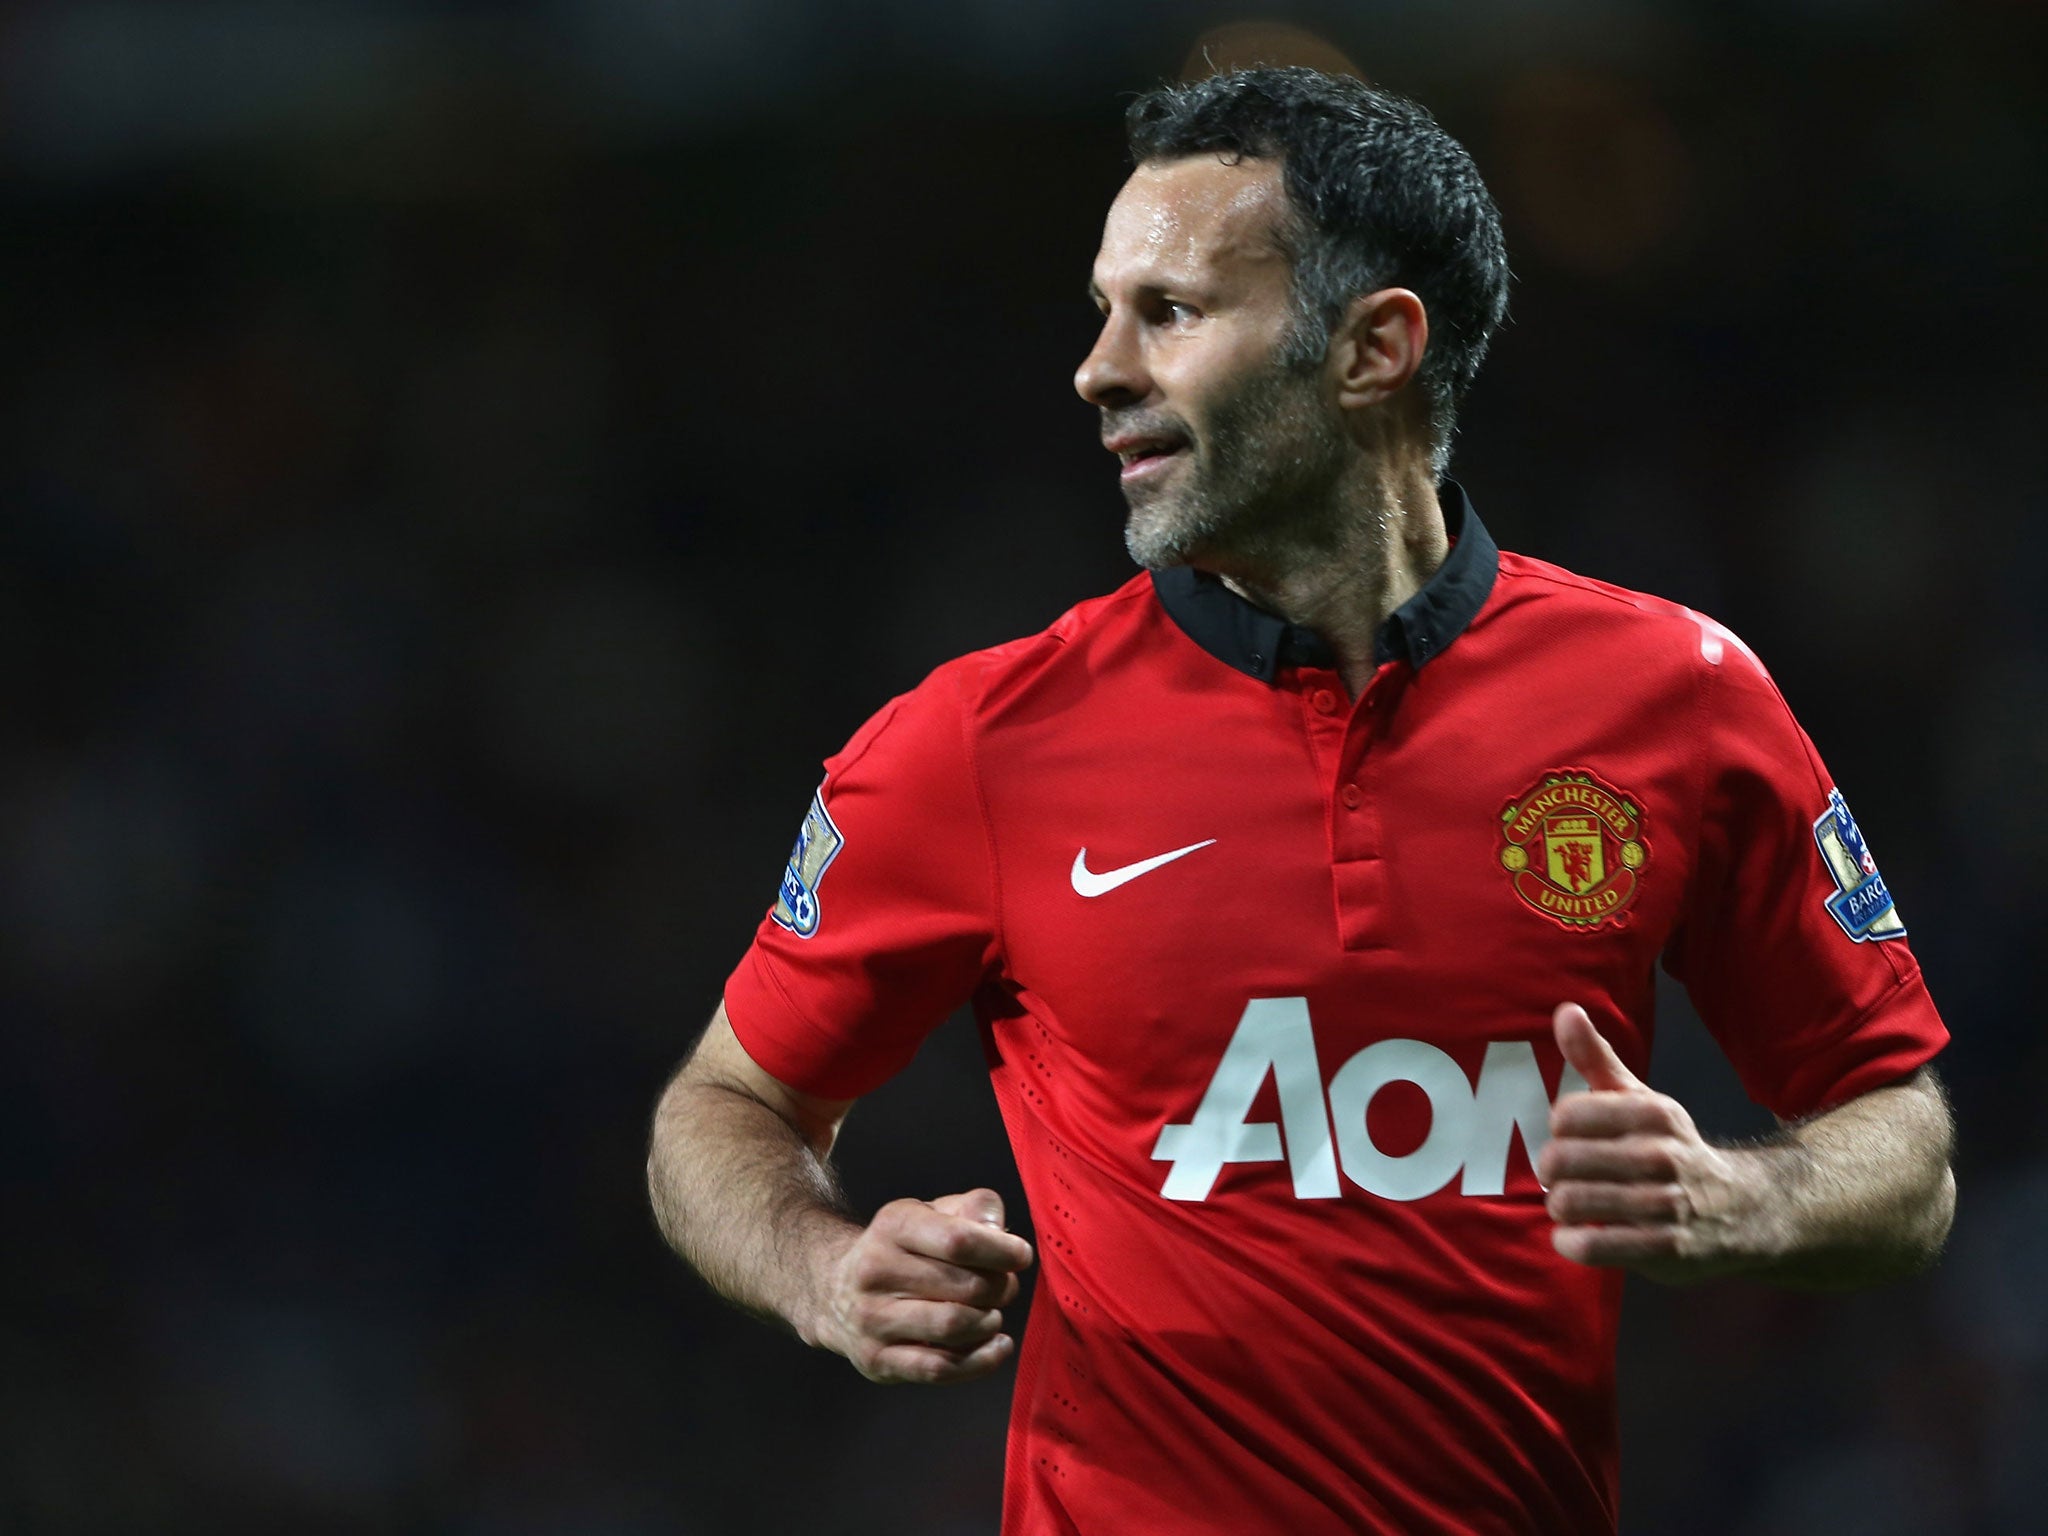 Ryan Giggs is sure that United will bounce back